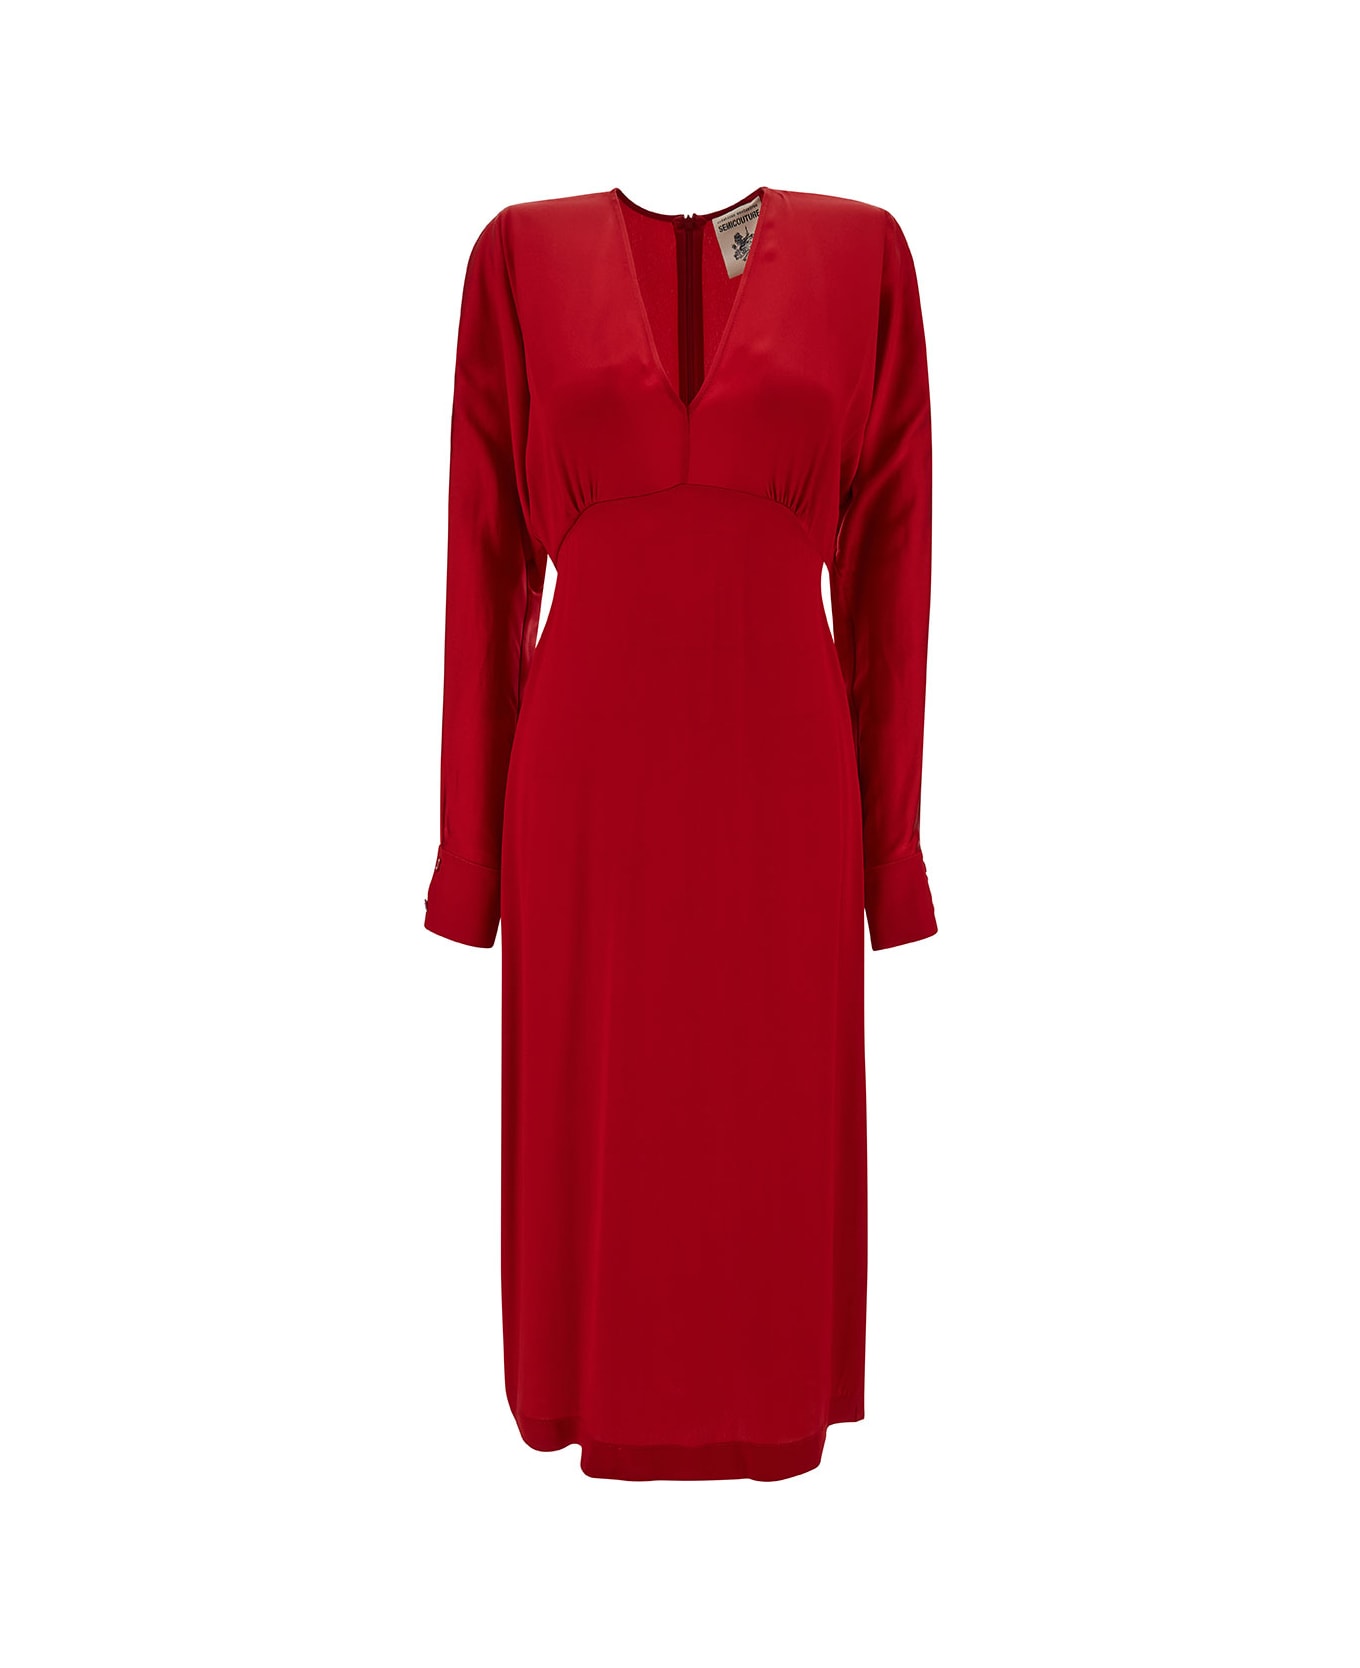 SEMICOUTURE Midi Red V Neck Dress With Long Sleeve In Acetate And Silk Blend Woman - Red ワンピース＆ドレス